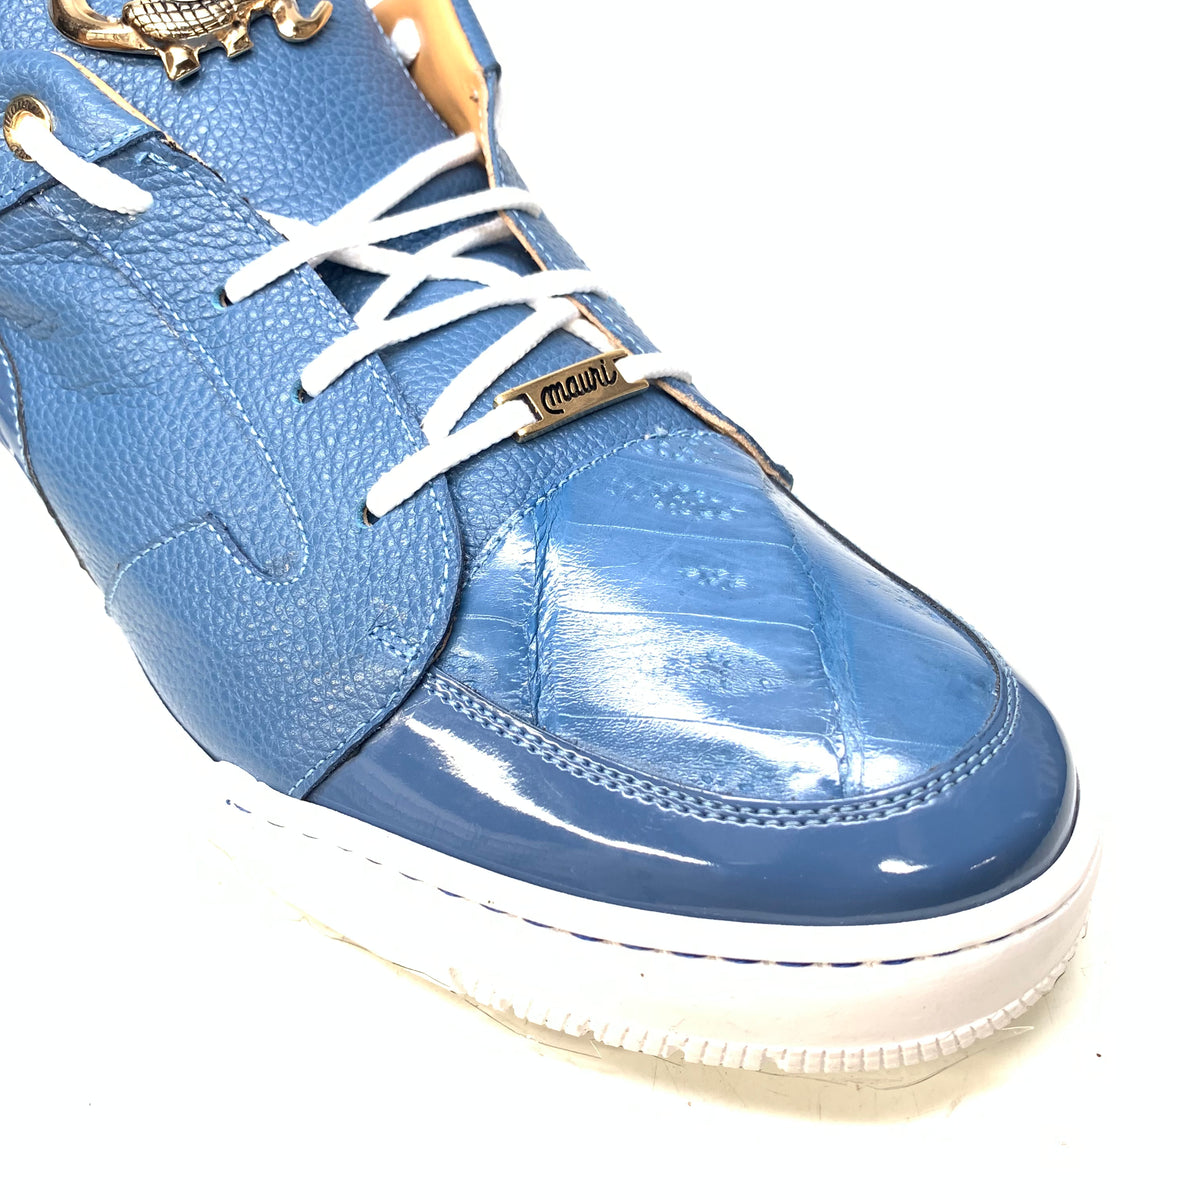 Mauri '8412' Caribbean Blue Alligator/Suede/Patent Leather Low Top Sneakers - Dudes Boutique